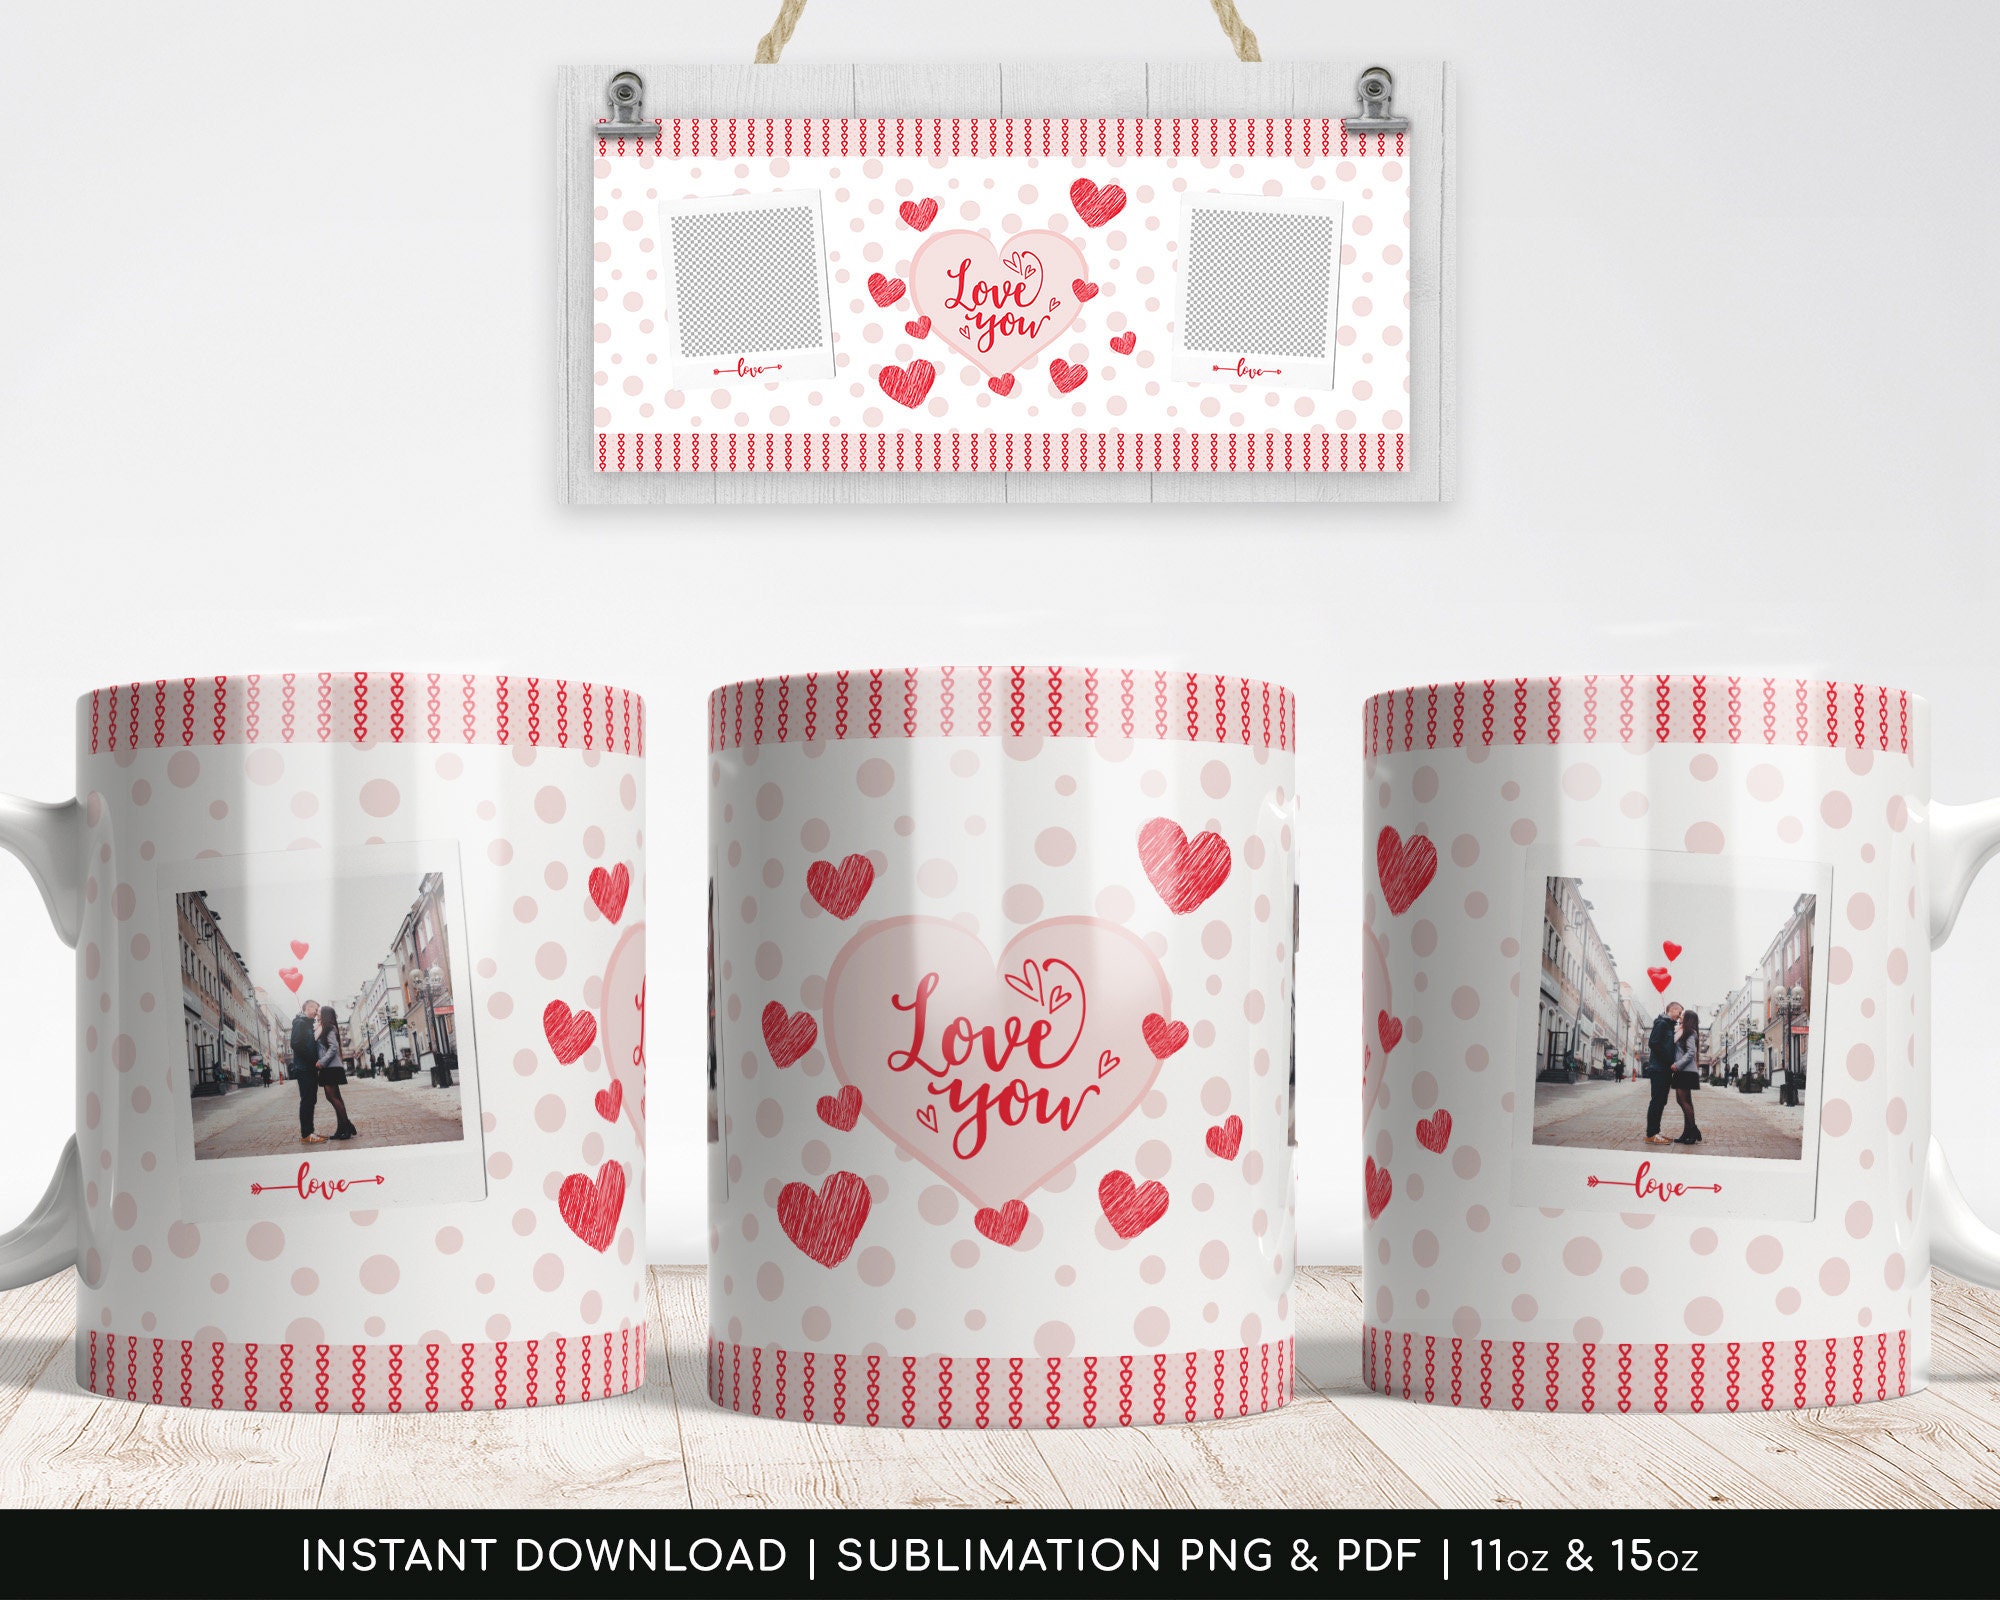 Love You Mug Template, Sublimation Valentines Design, Heart and Polka Dots Pattern, Transfers 11oz | 15oz - High-Resolution Transparent PNG